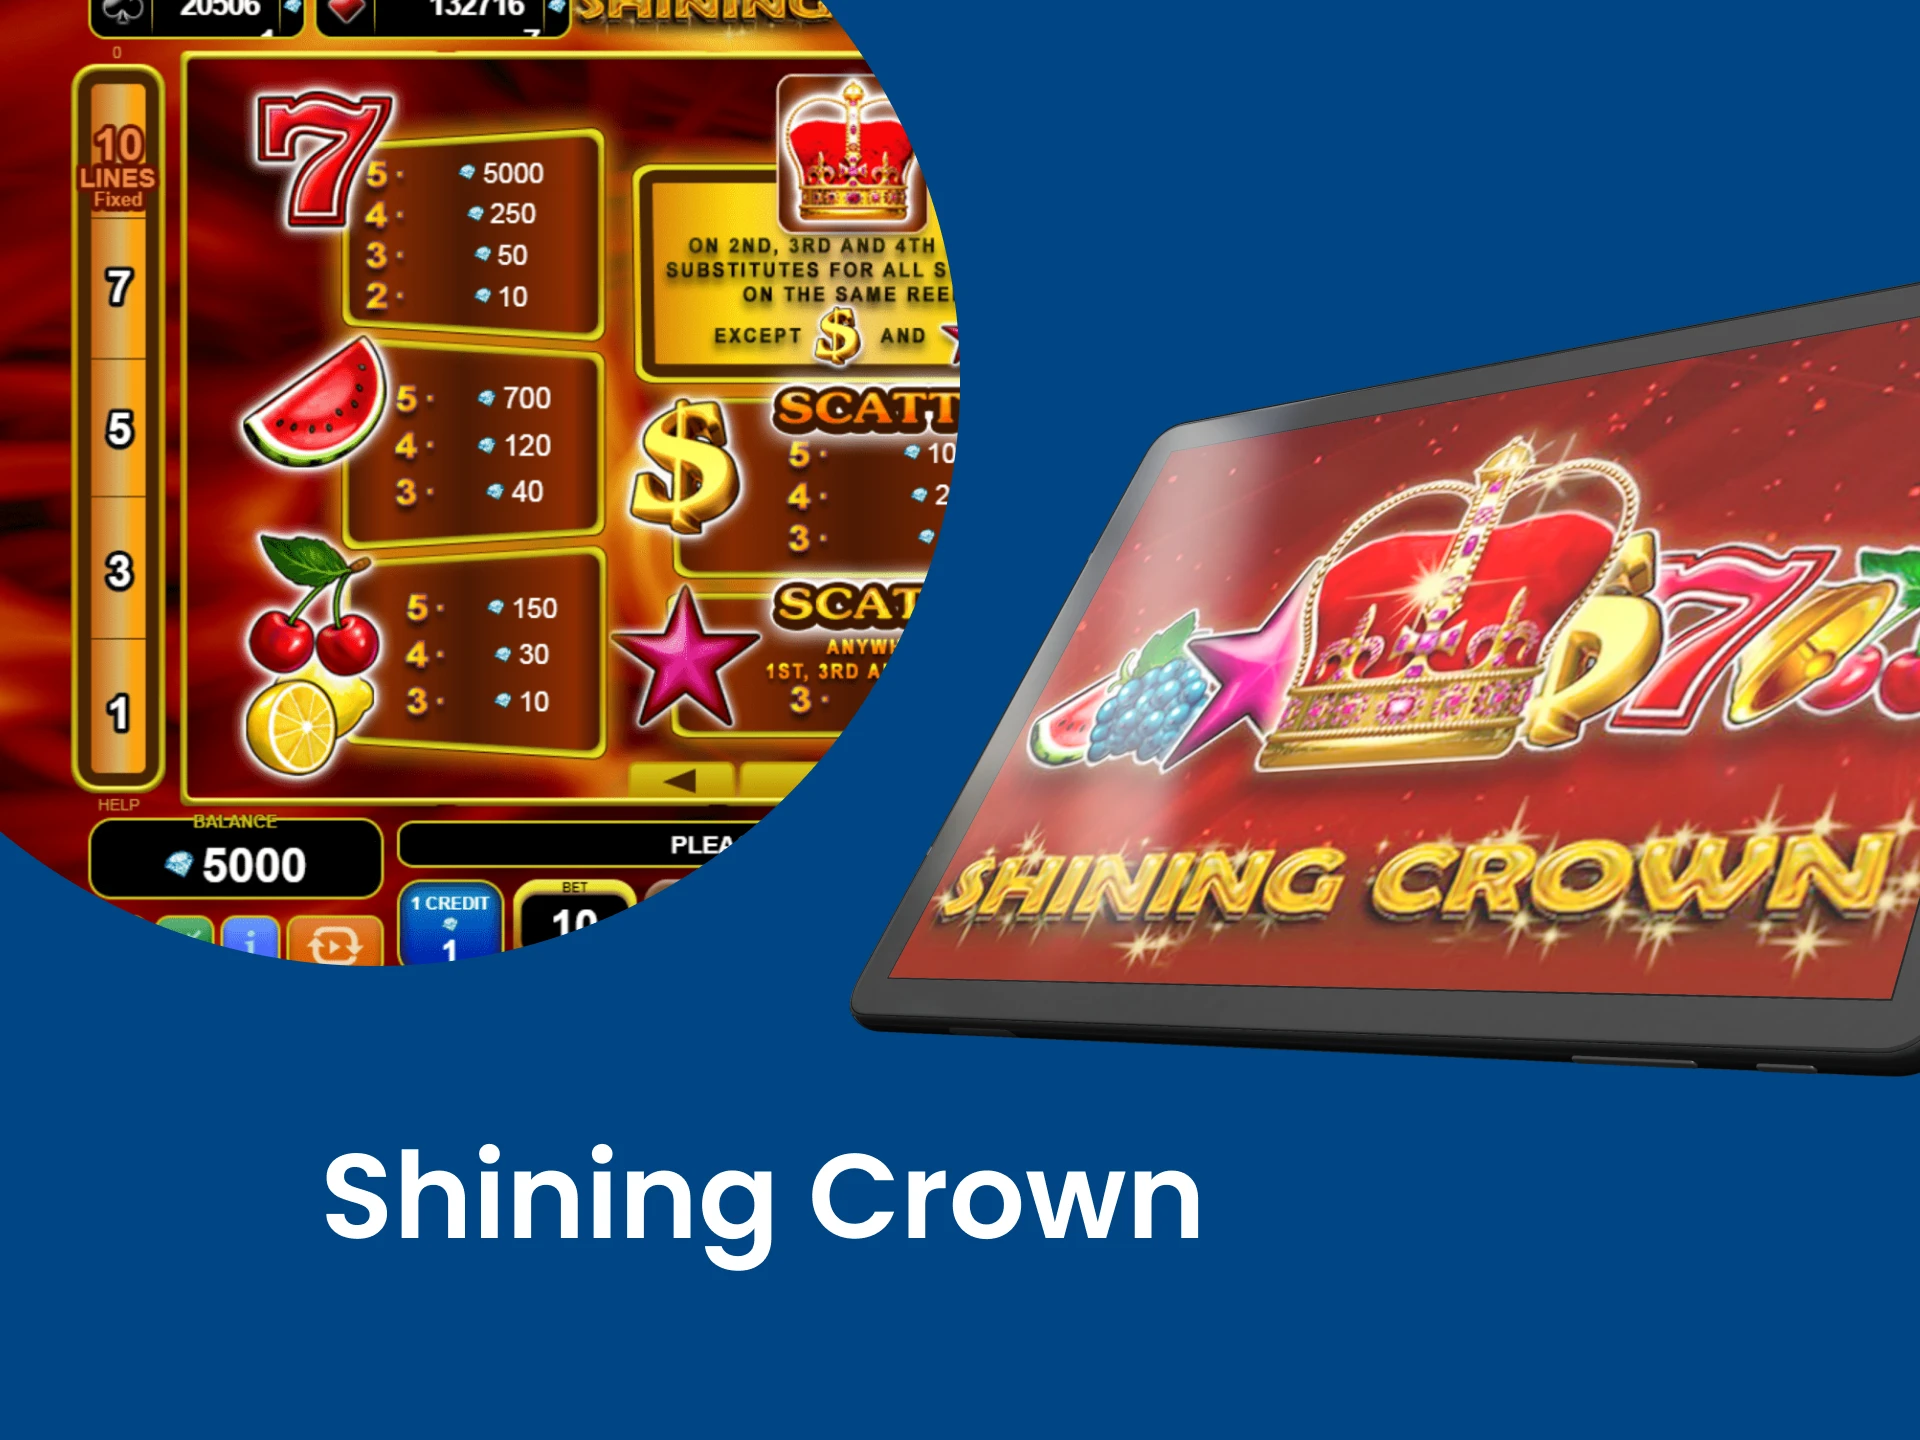 Try your hand at the Shining Crown game for iPad.